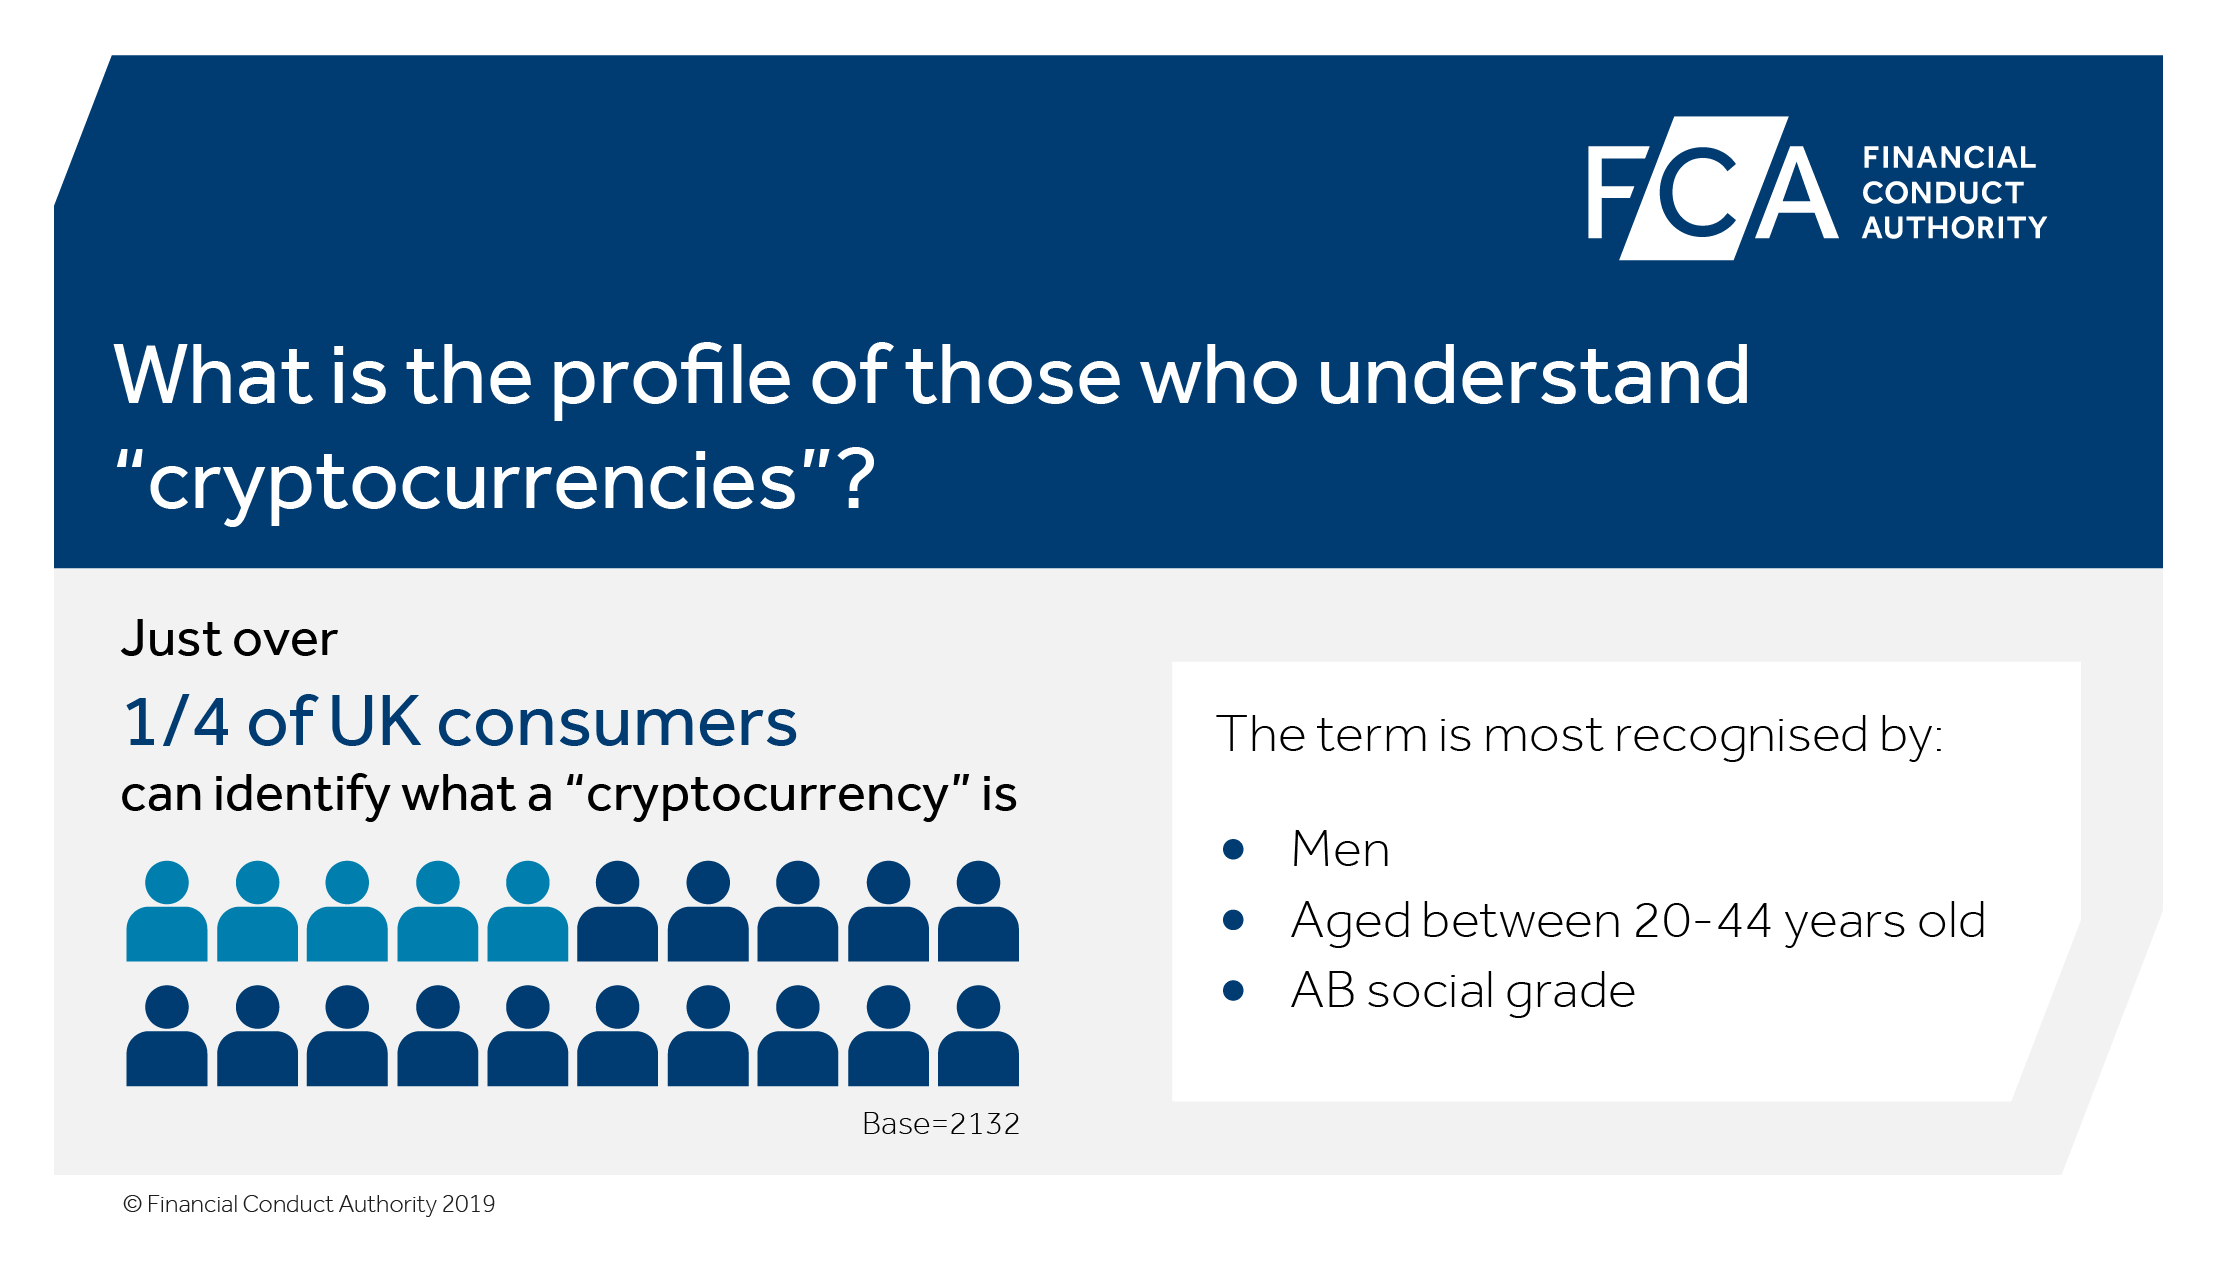 What is the profile of those who understand cryptocurrencies?